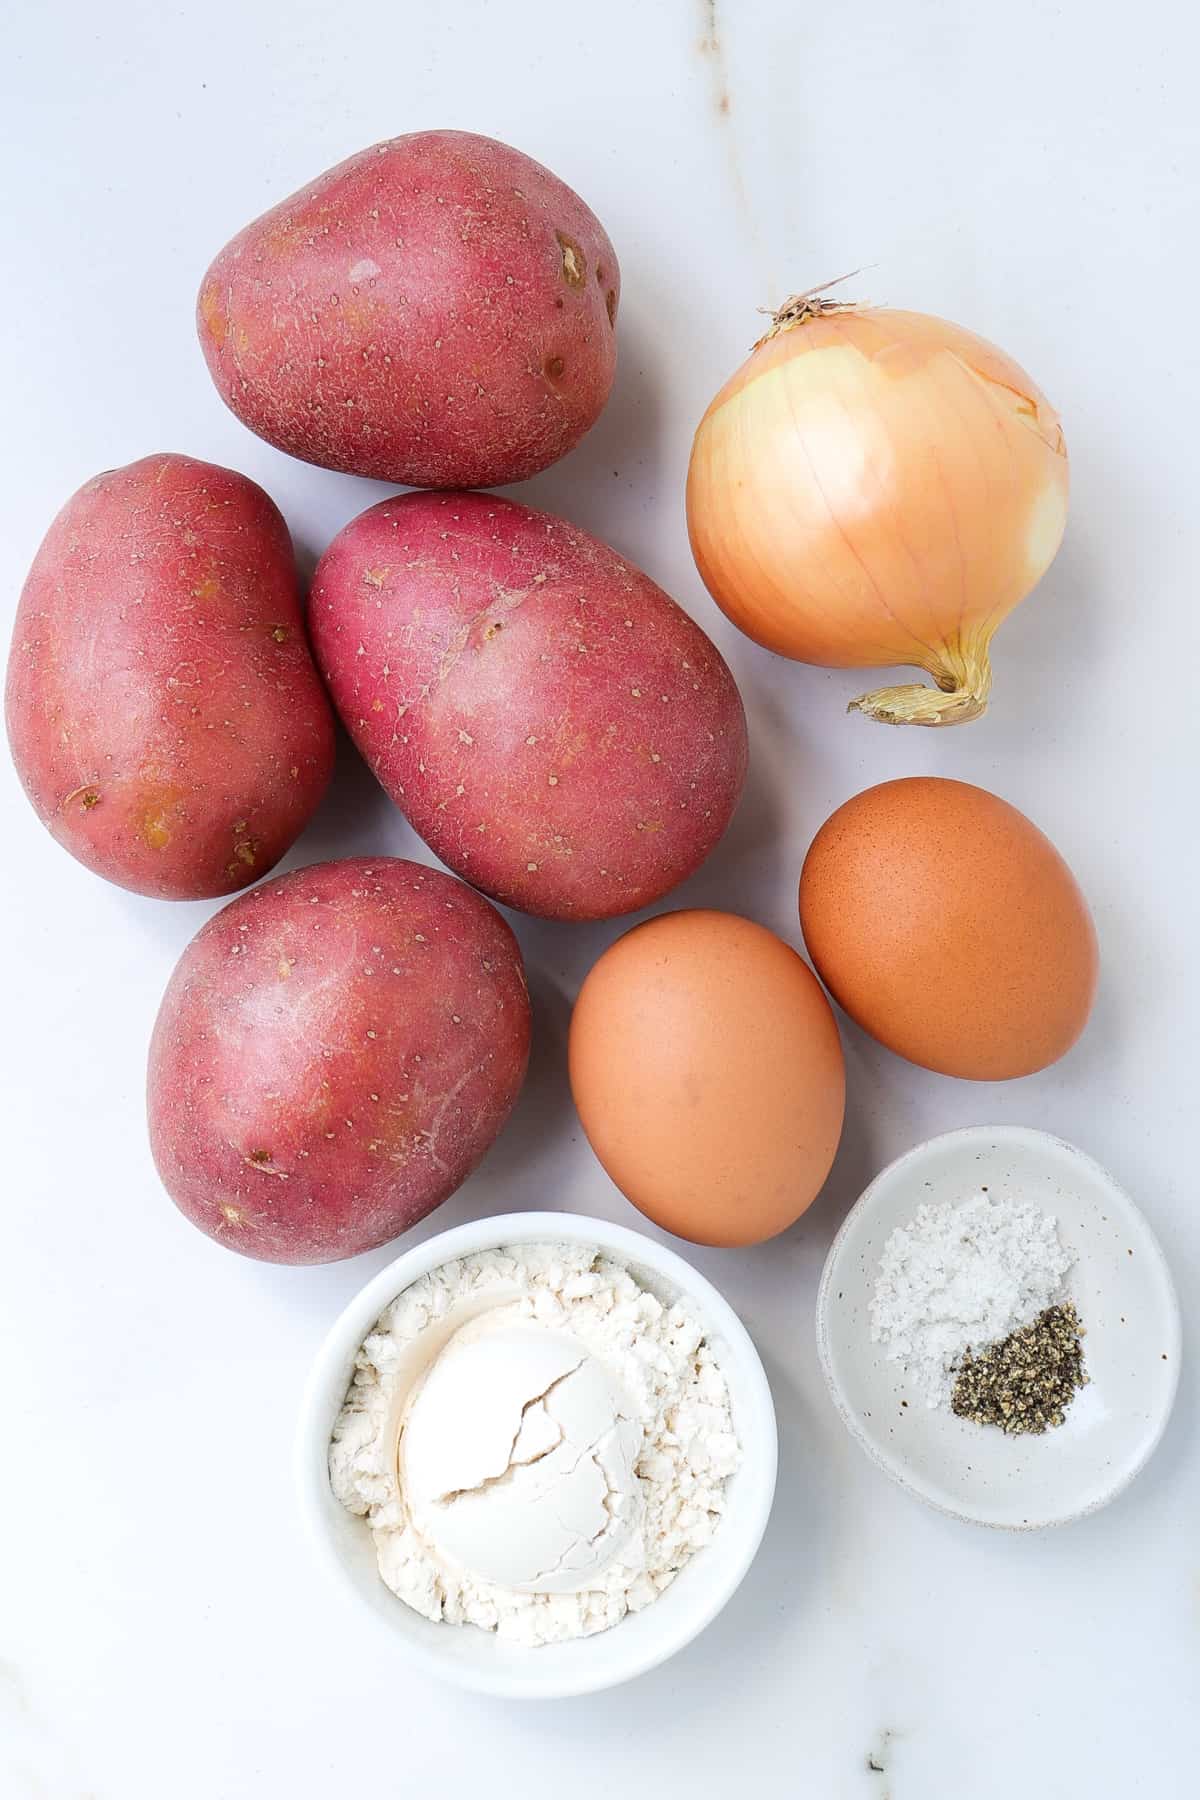 Ingredients shown to make air fryer potato fritters.